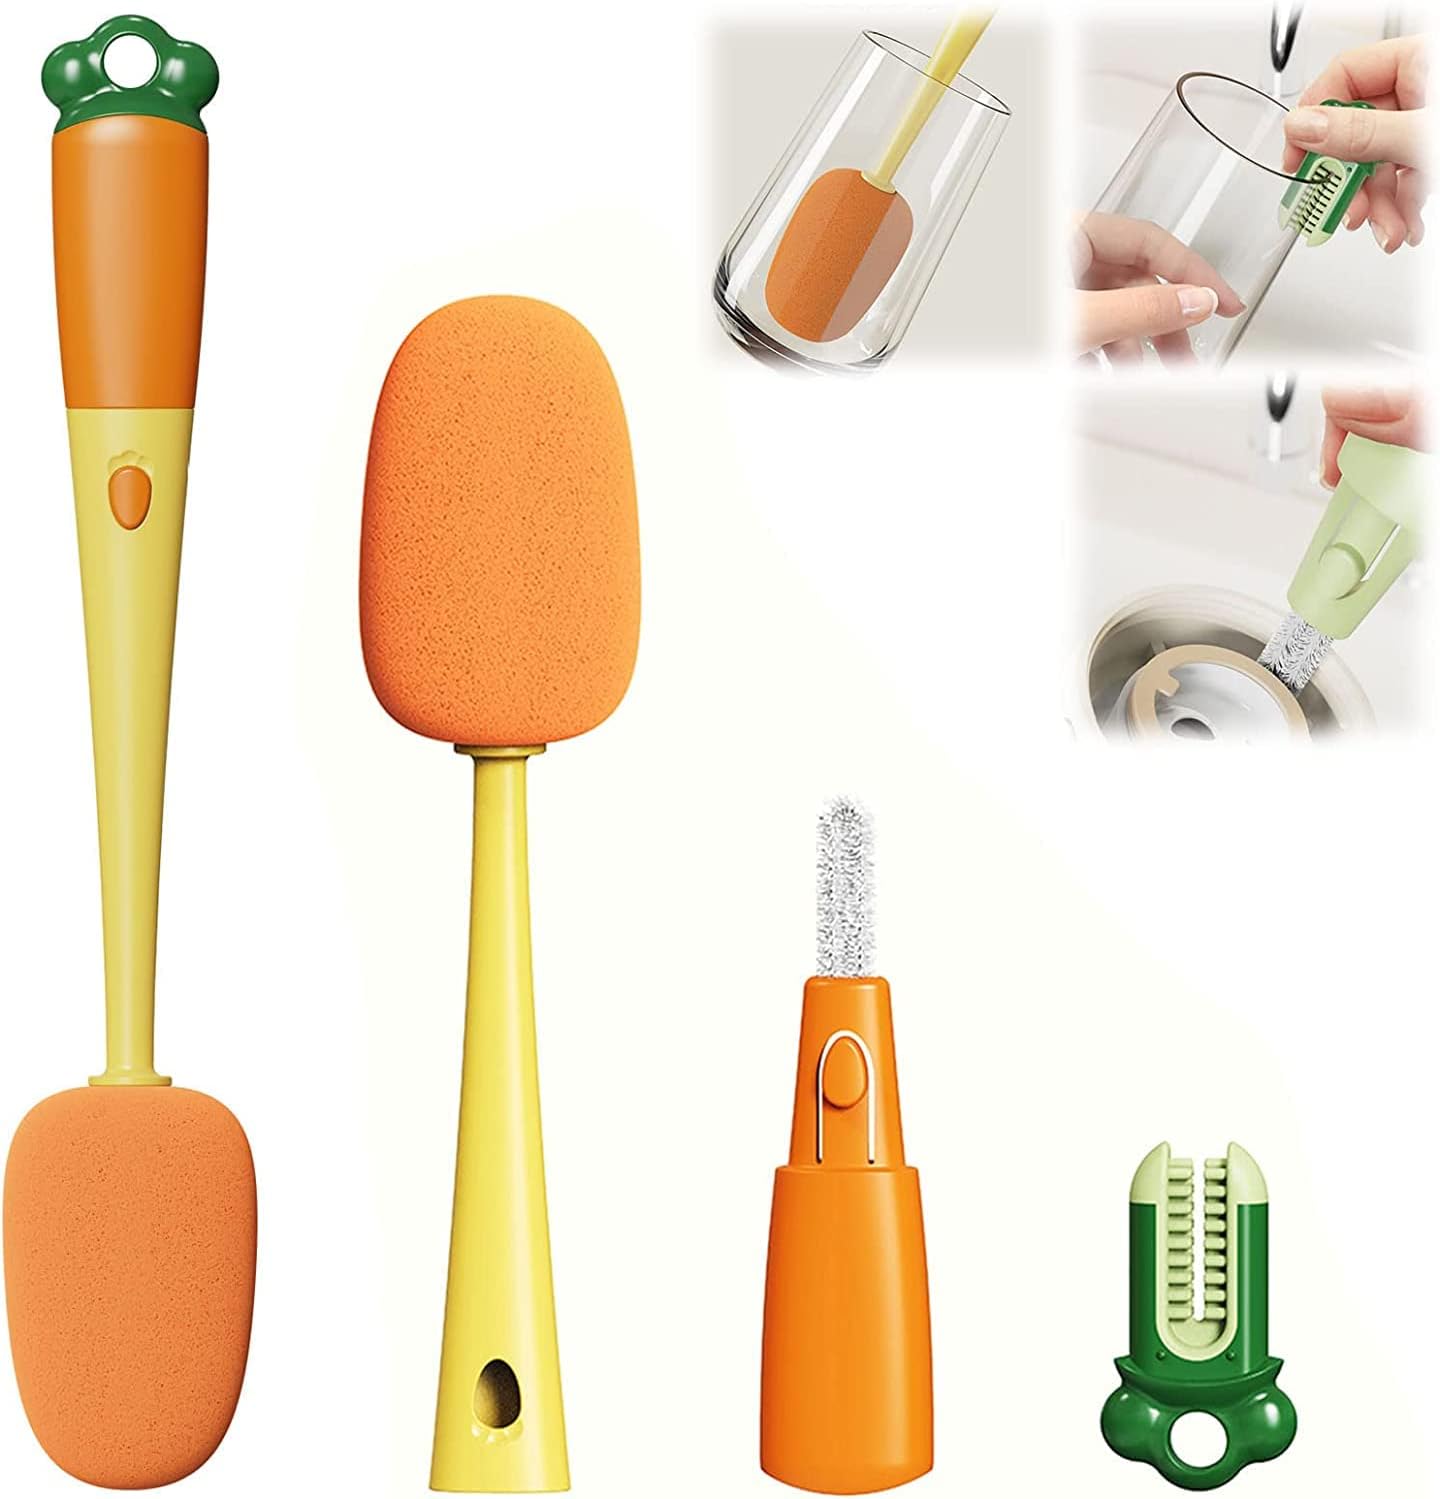 Multifunctional 3 In 1 Crevice Brush For Cleaning Bottles For Home